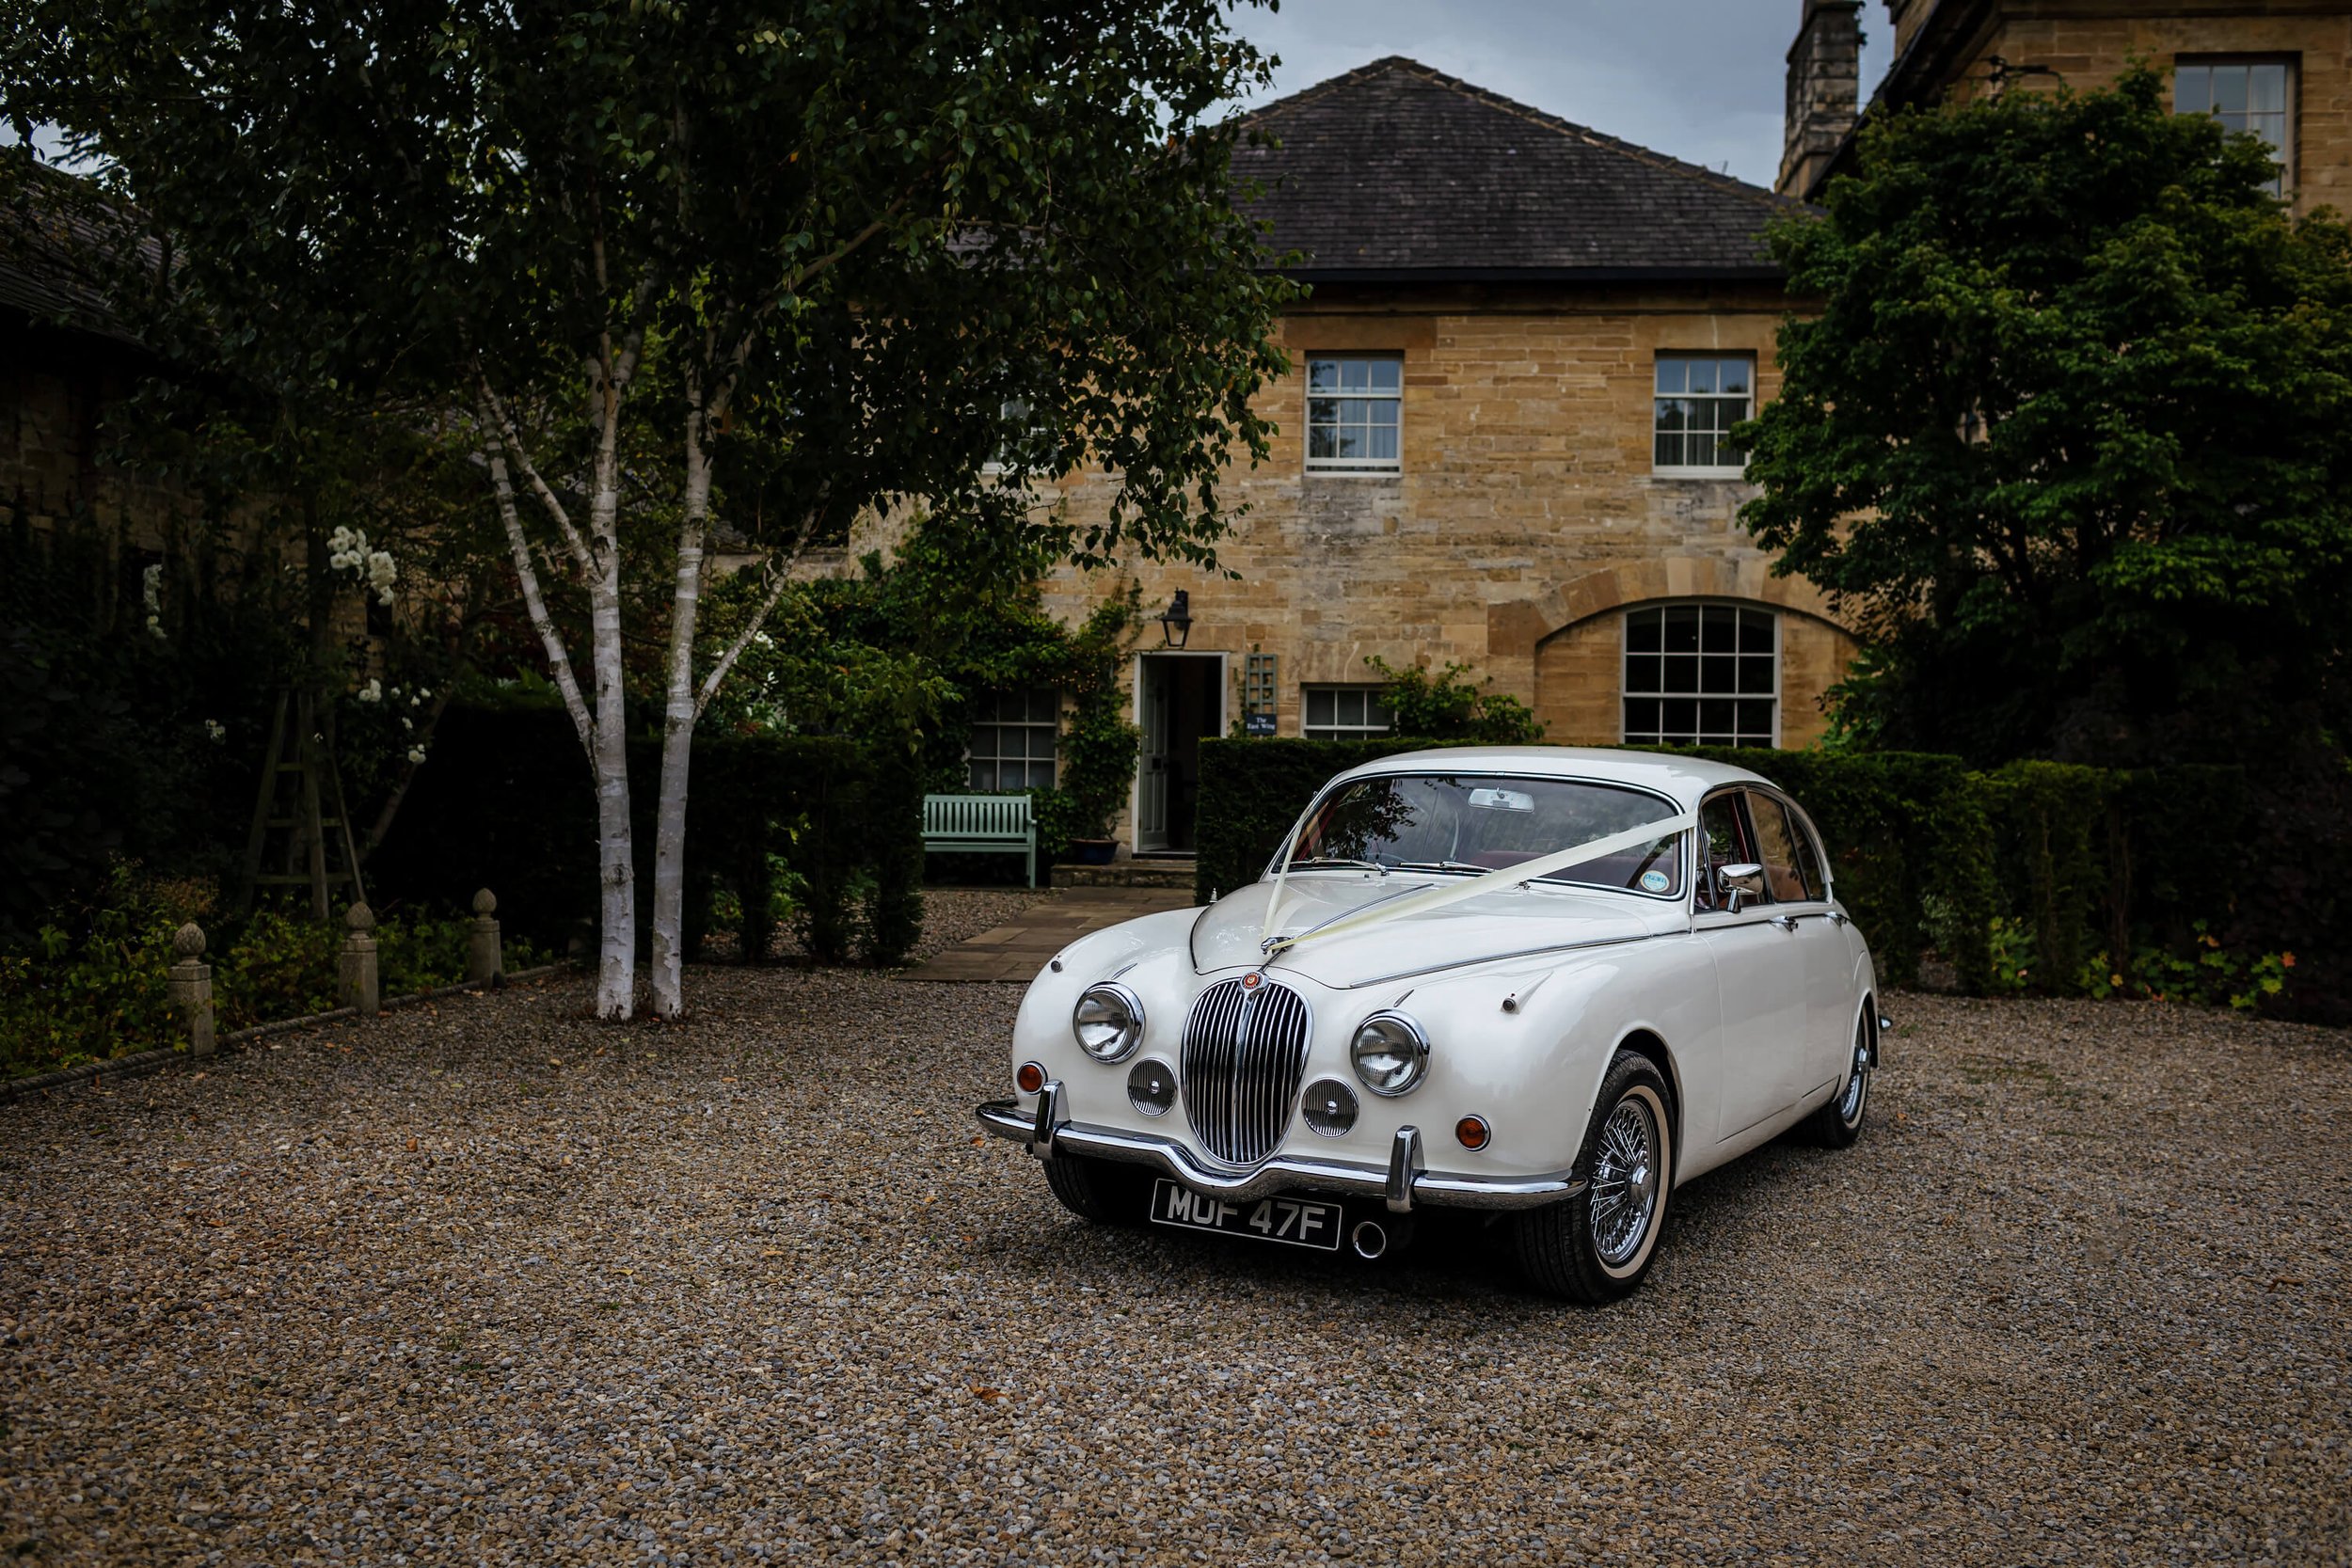 Mark 2 Jaguar ready for a wedding in Yorkshire